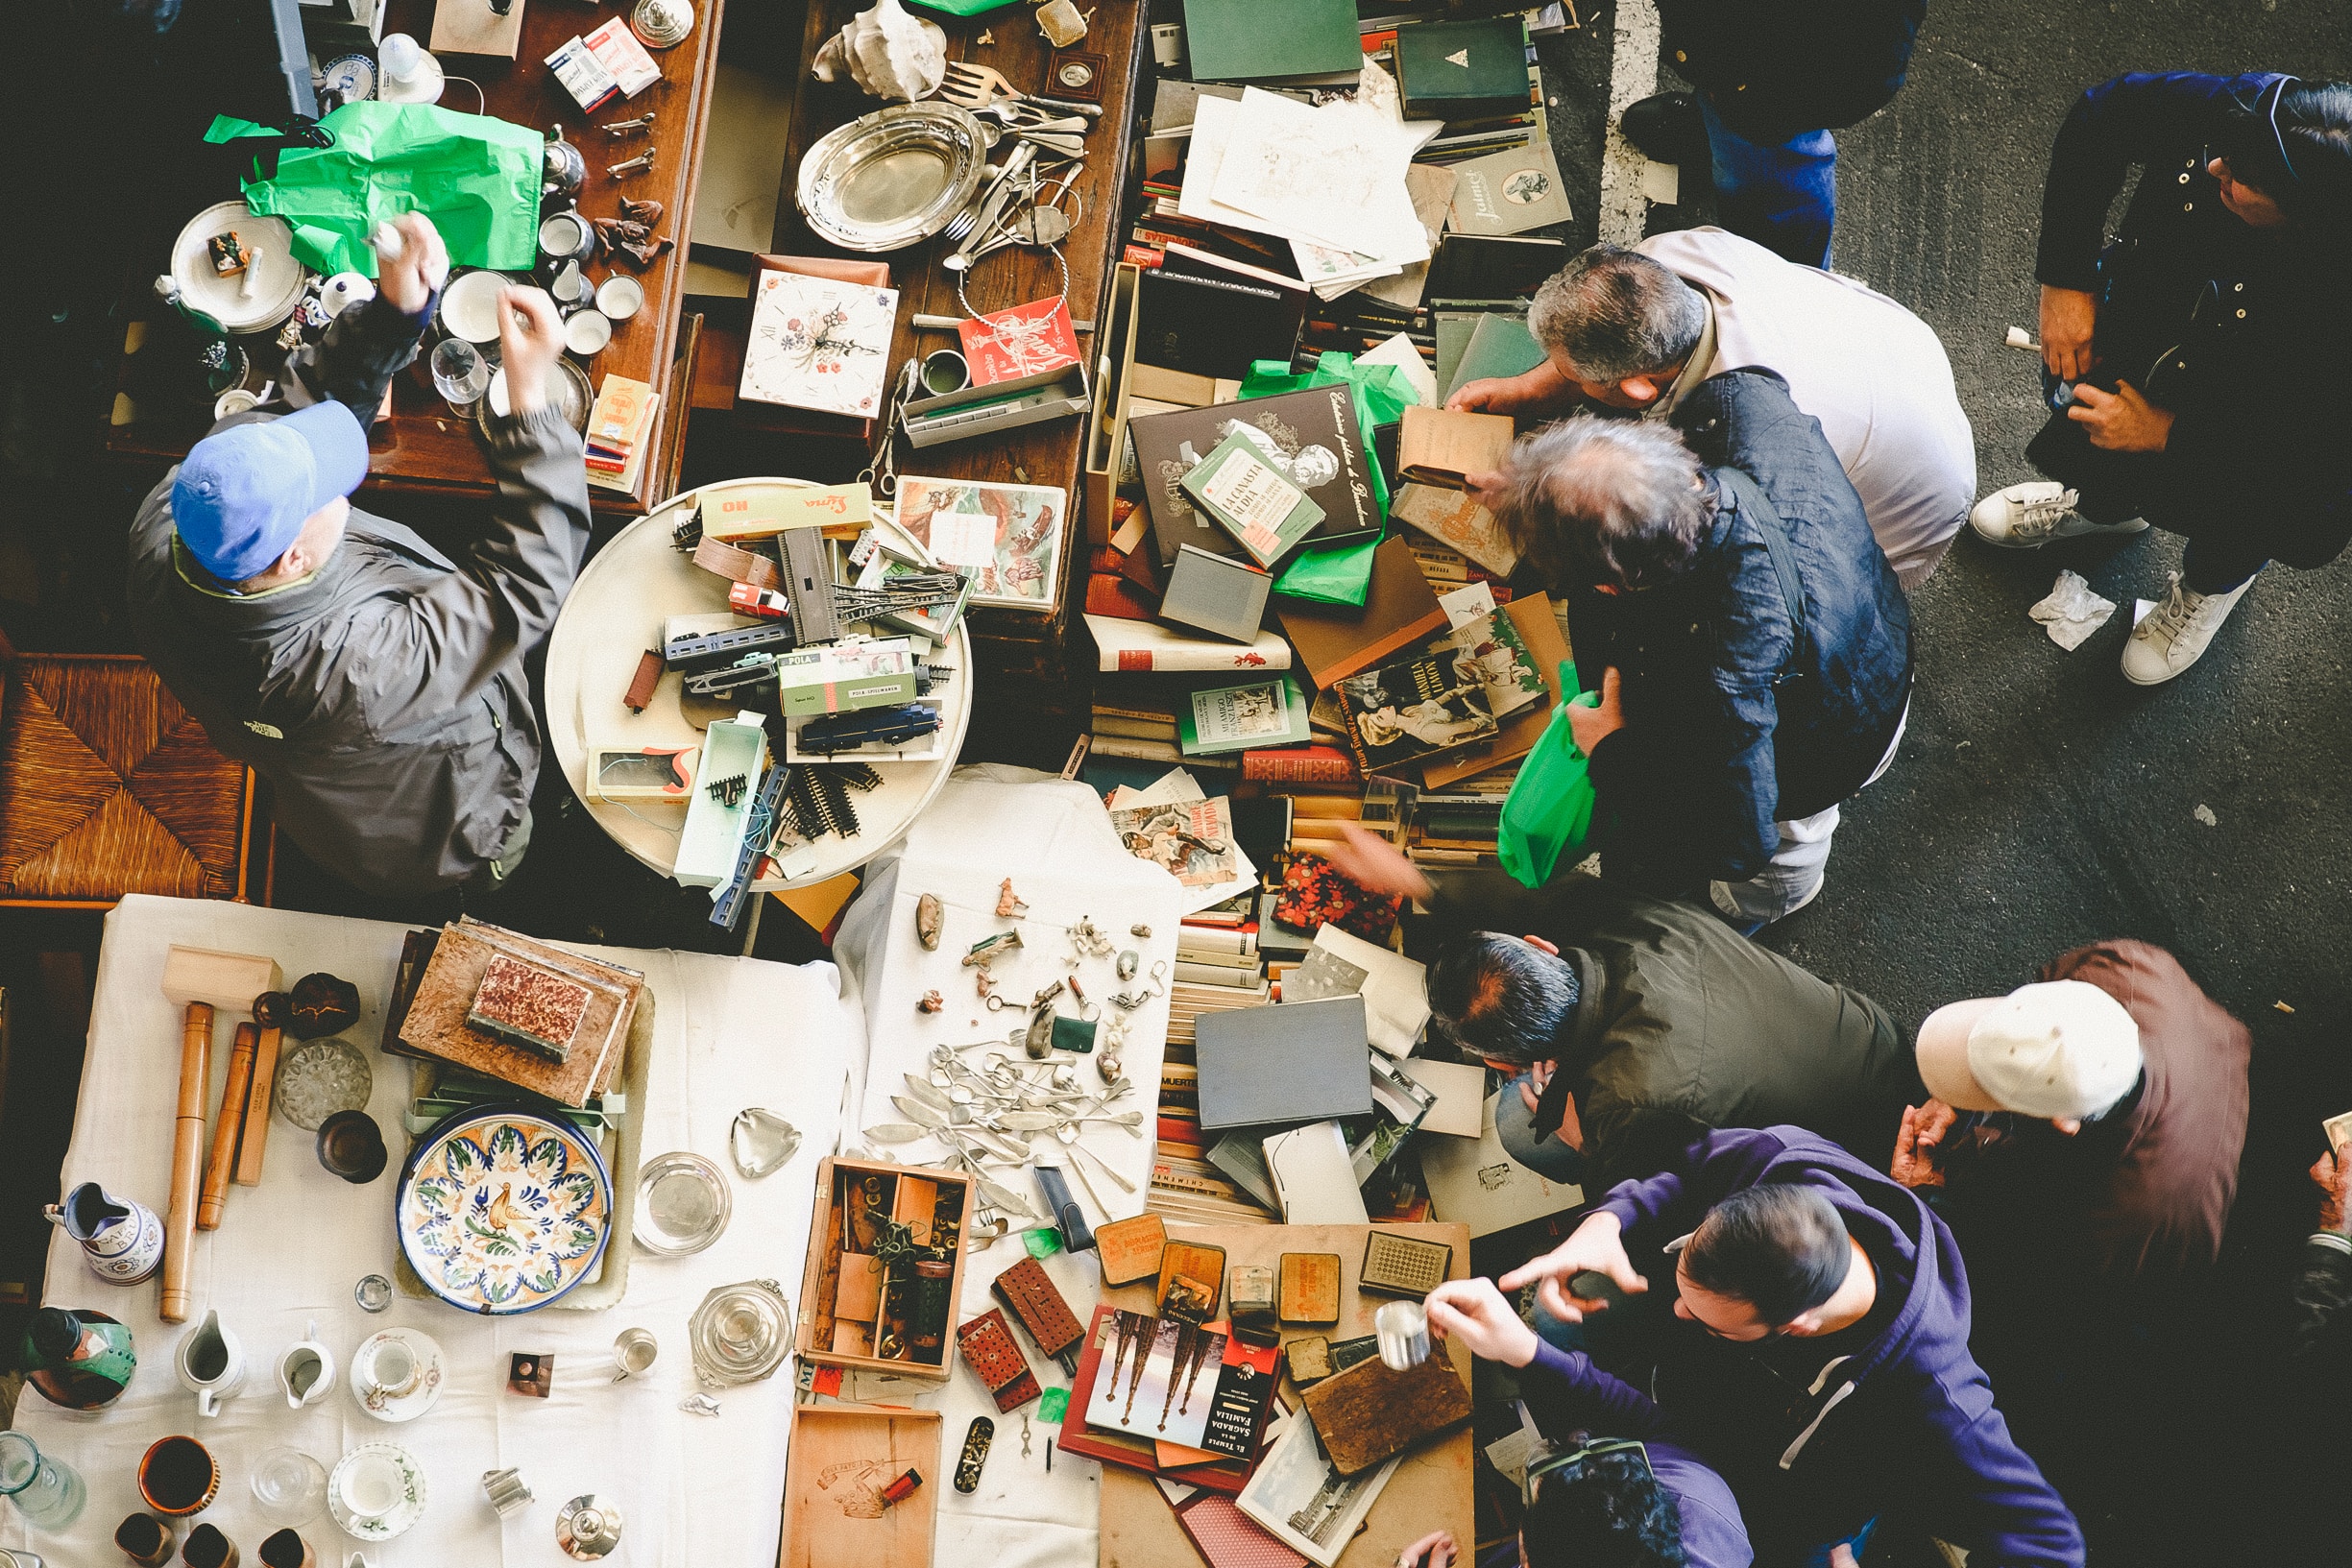 People searching for souvenirs in a flea market